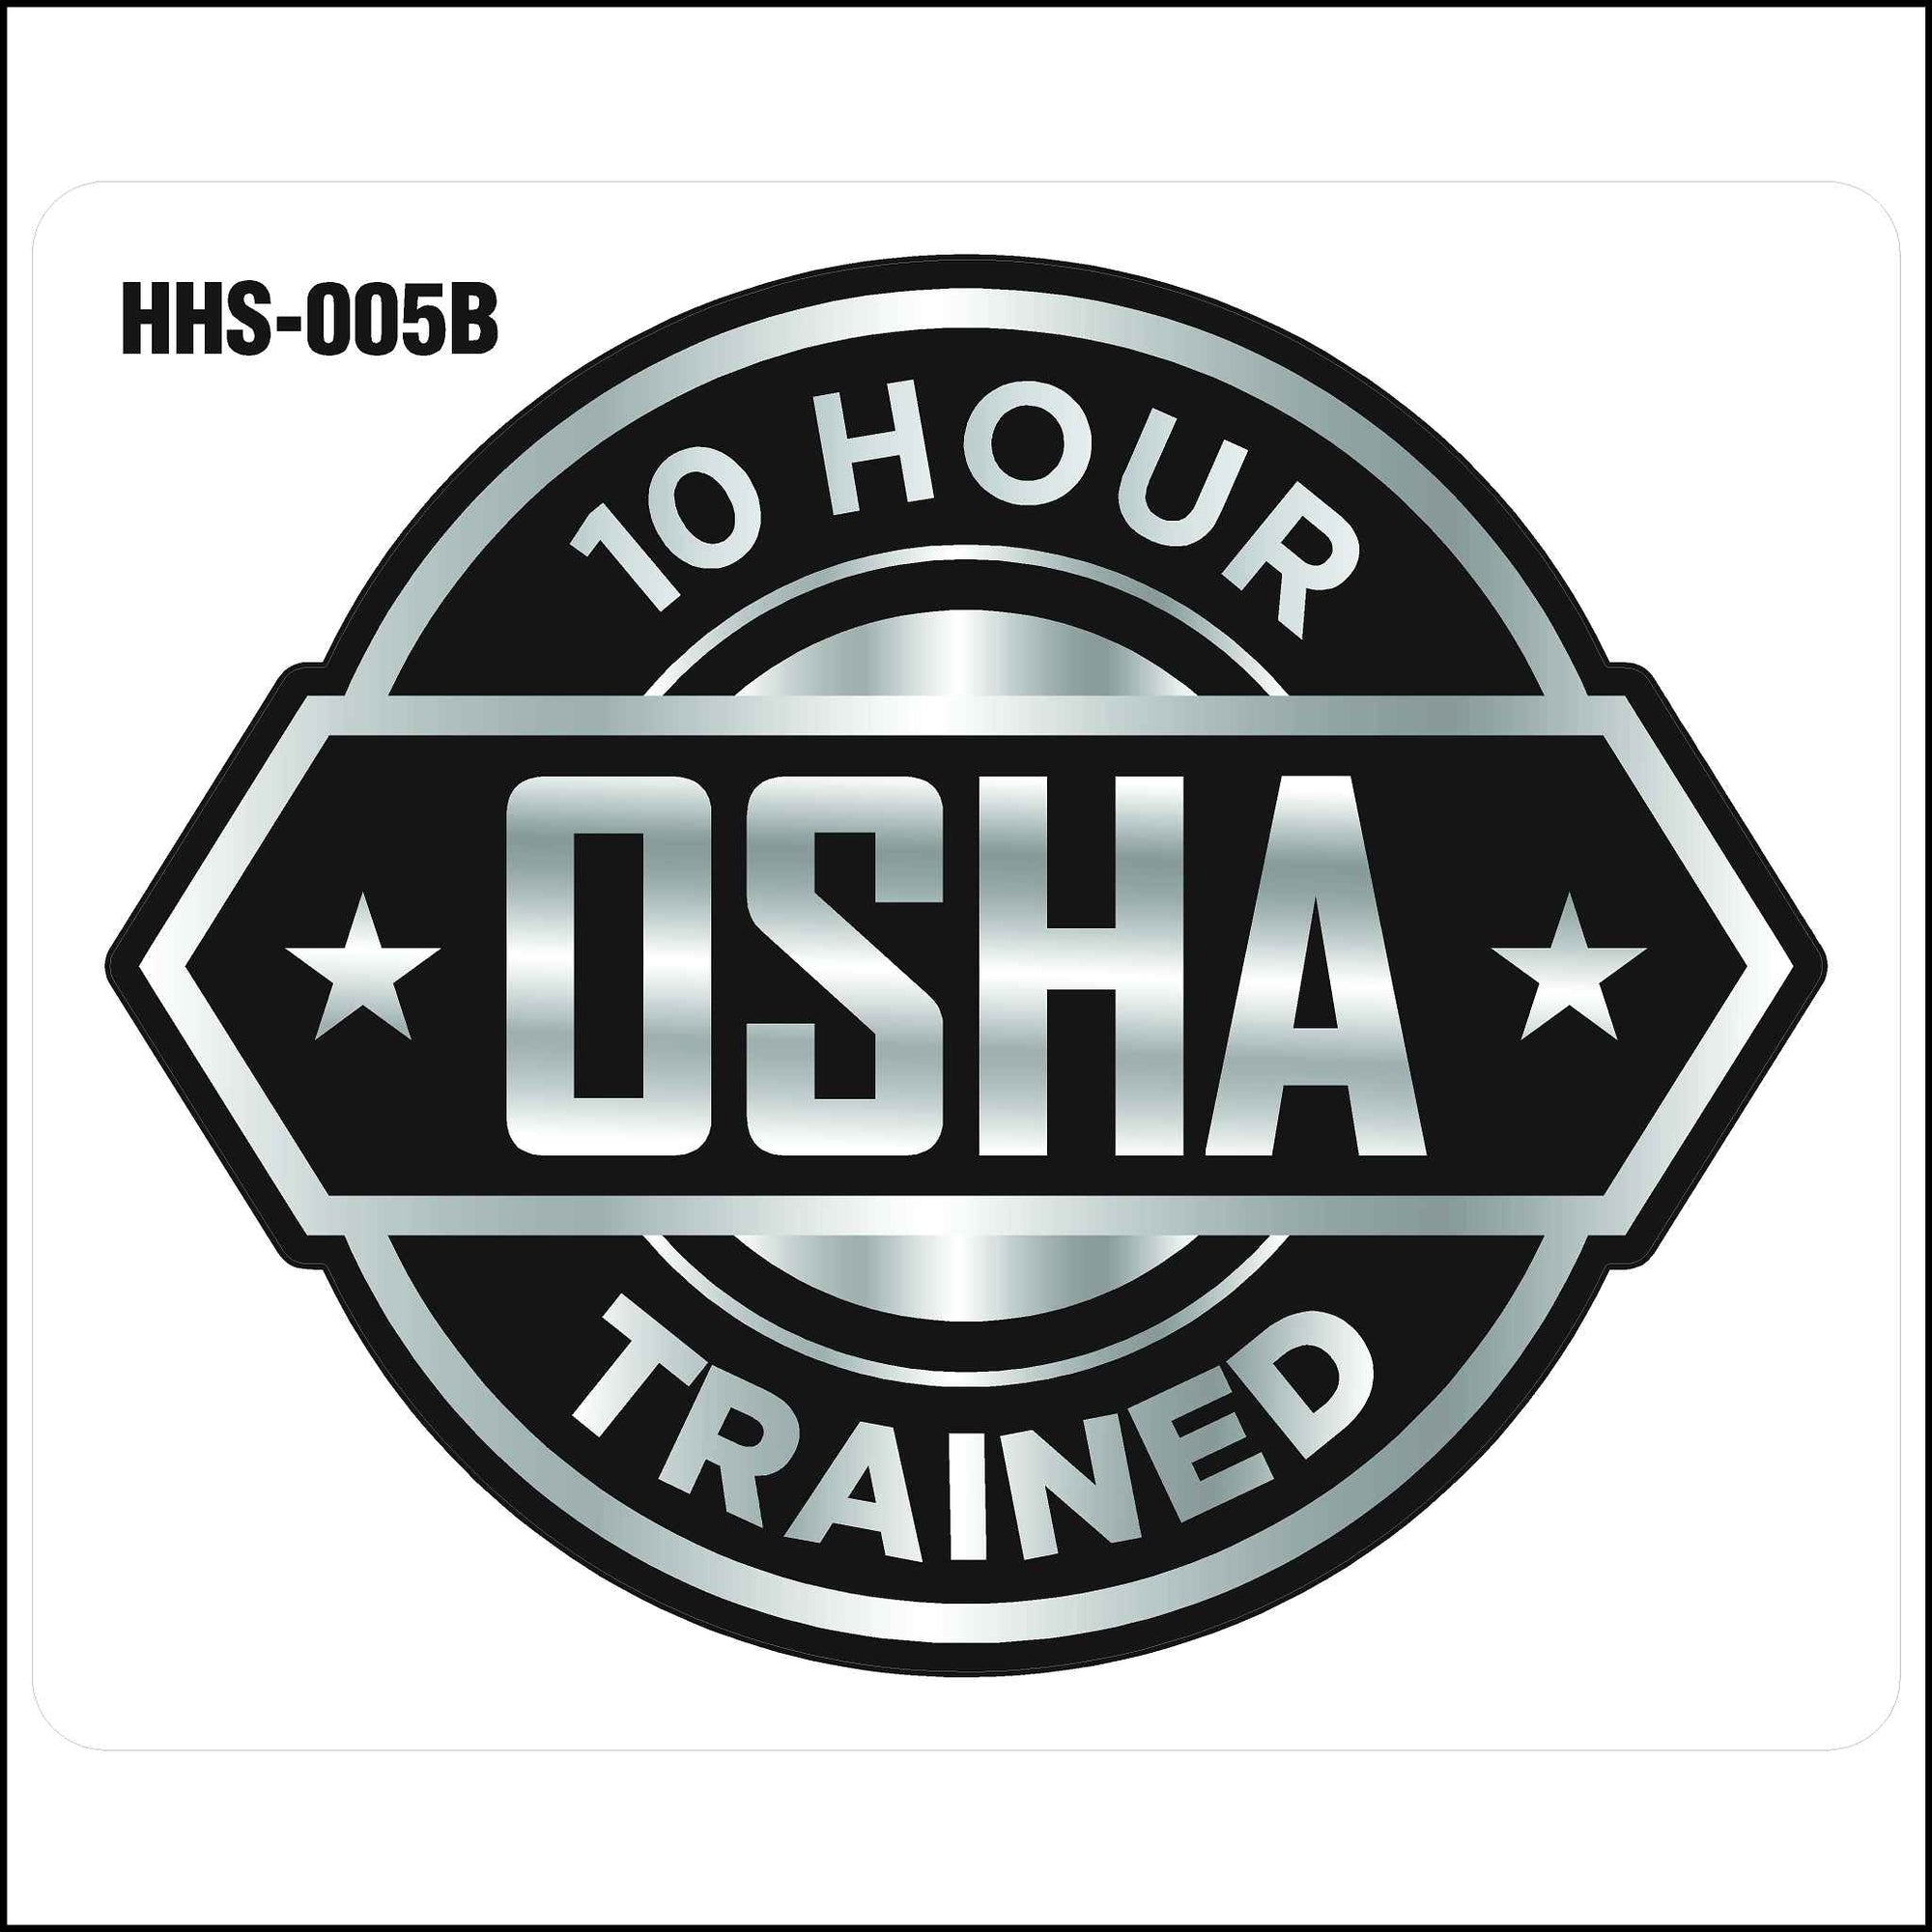 osha 10 hour trained hard hat sticker silver in color with black background with stars